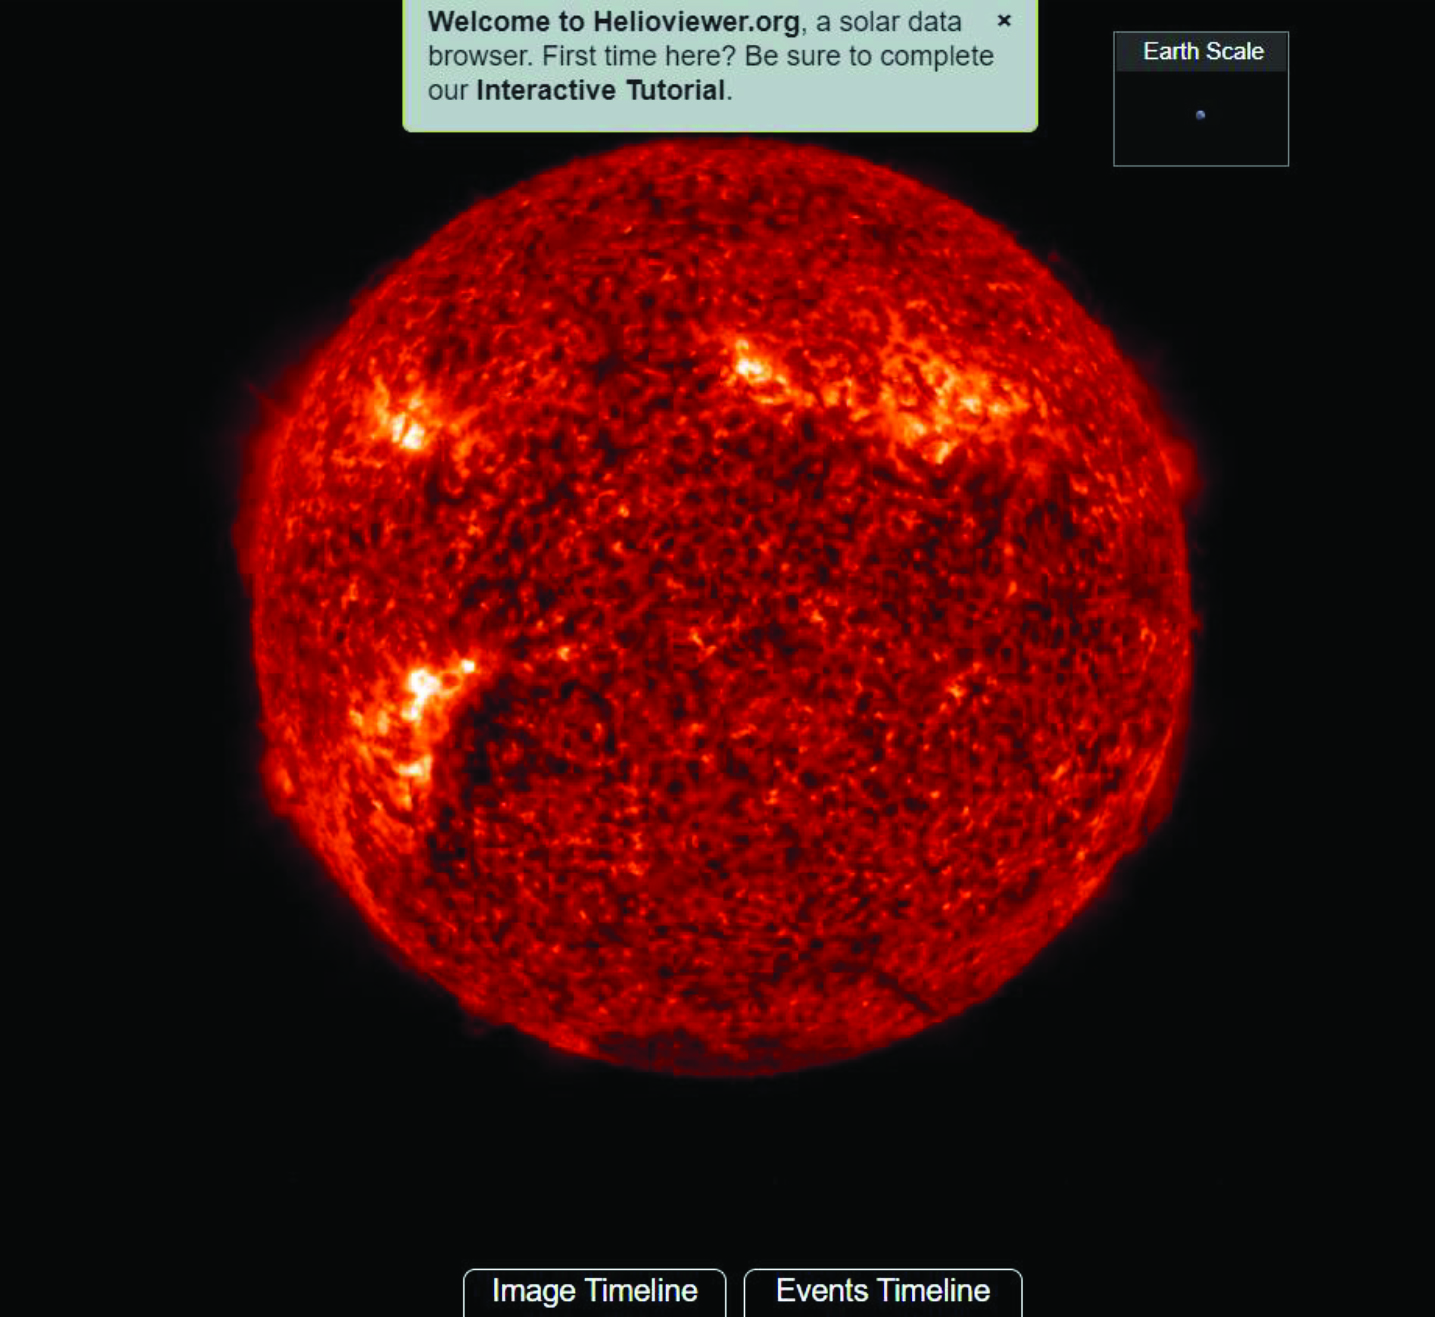 The sun, over 100 times larger in diameter than Earth, drives many of our planet’s processes. Tools such as the Helioviewer, part of The NOVA Sun Lab, allow students to study our closest star like never before.